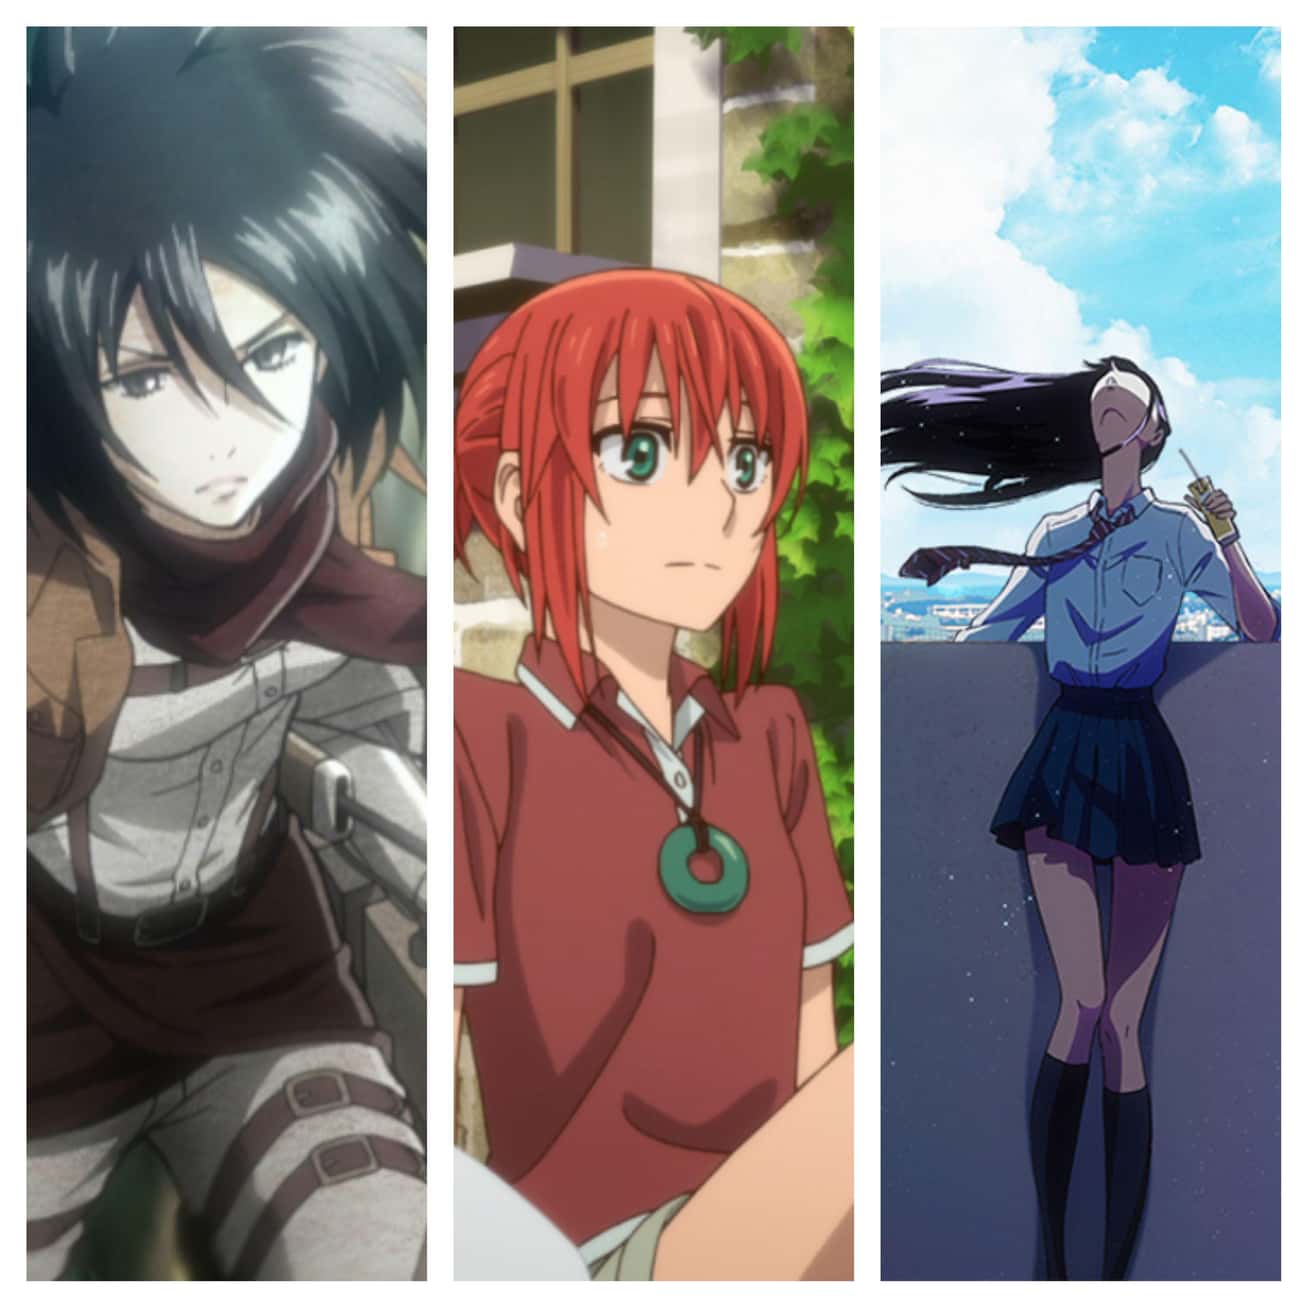 Wit Studio is listed (or ranked) 3 on the list The Greatest Anime Studios of All Time, Ranked